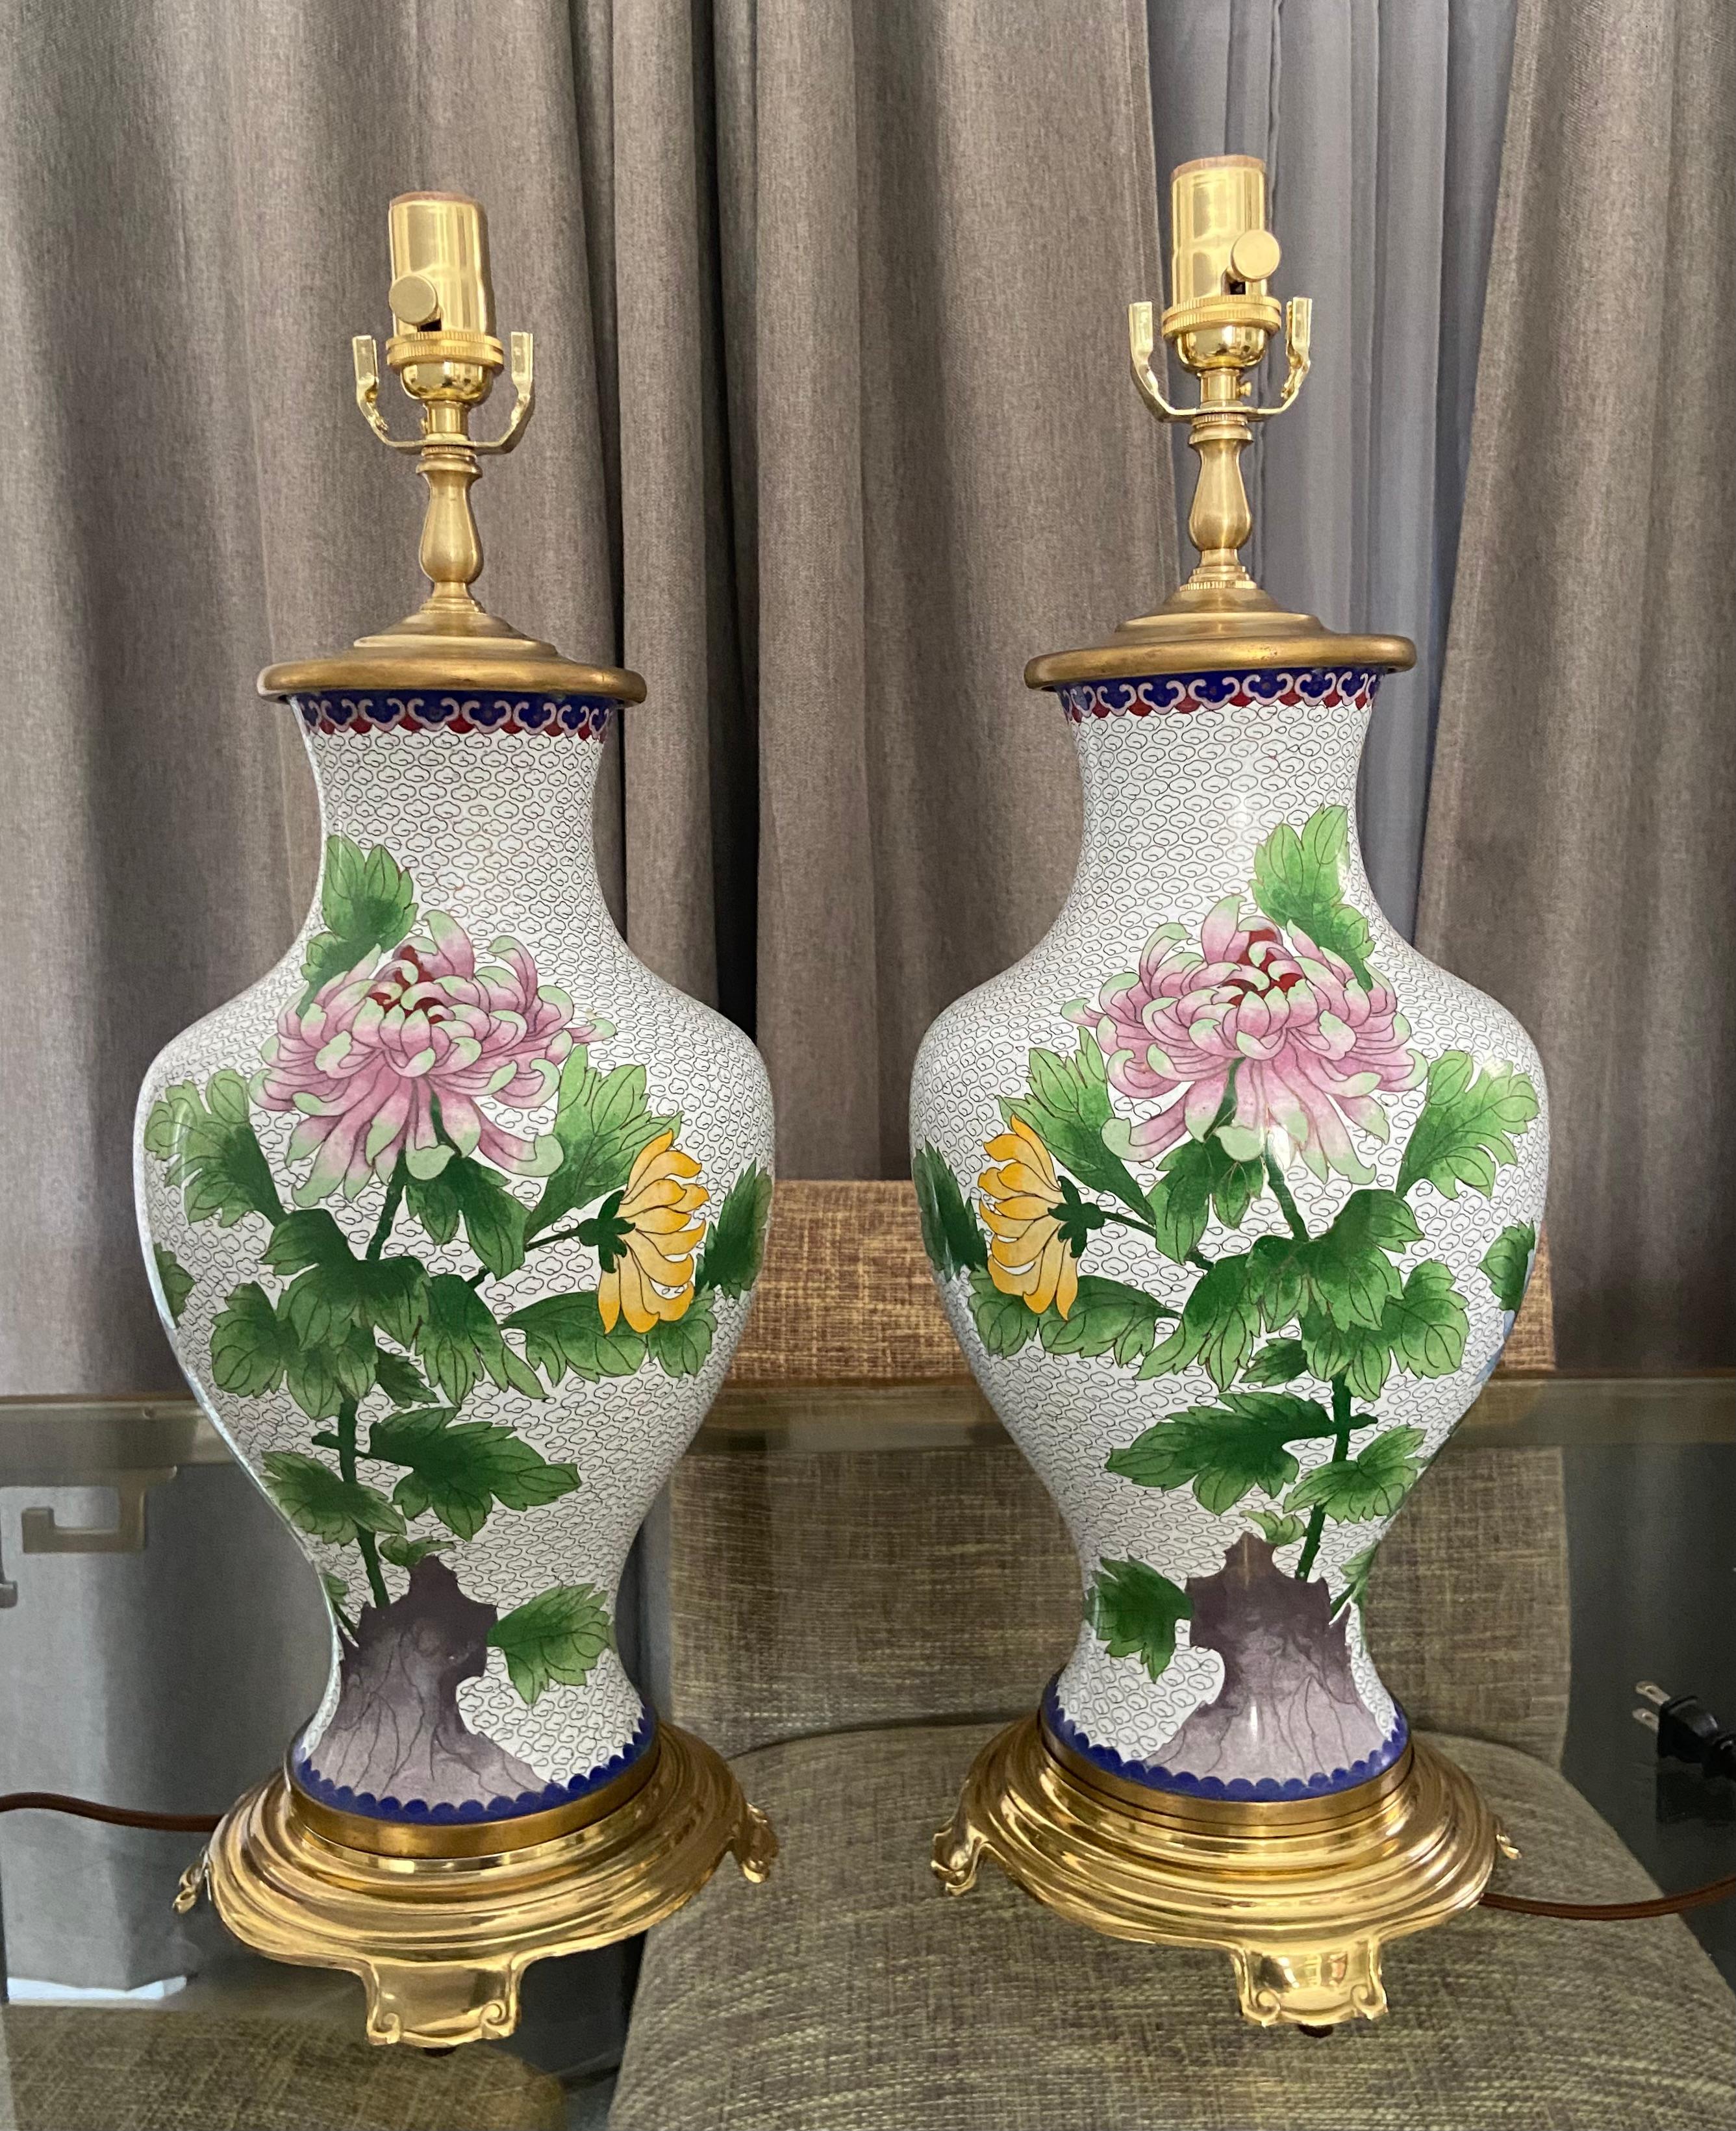 Pair of early 20th century Chinese Cloisonné floral motif table lamps mounted on custom brass bases. Rewired with new 3-way sockets and rayon cords. Height of Cloisonné vase 20